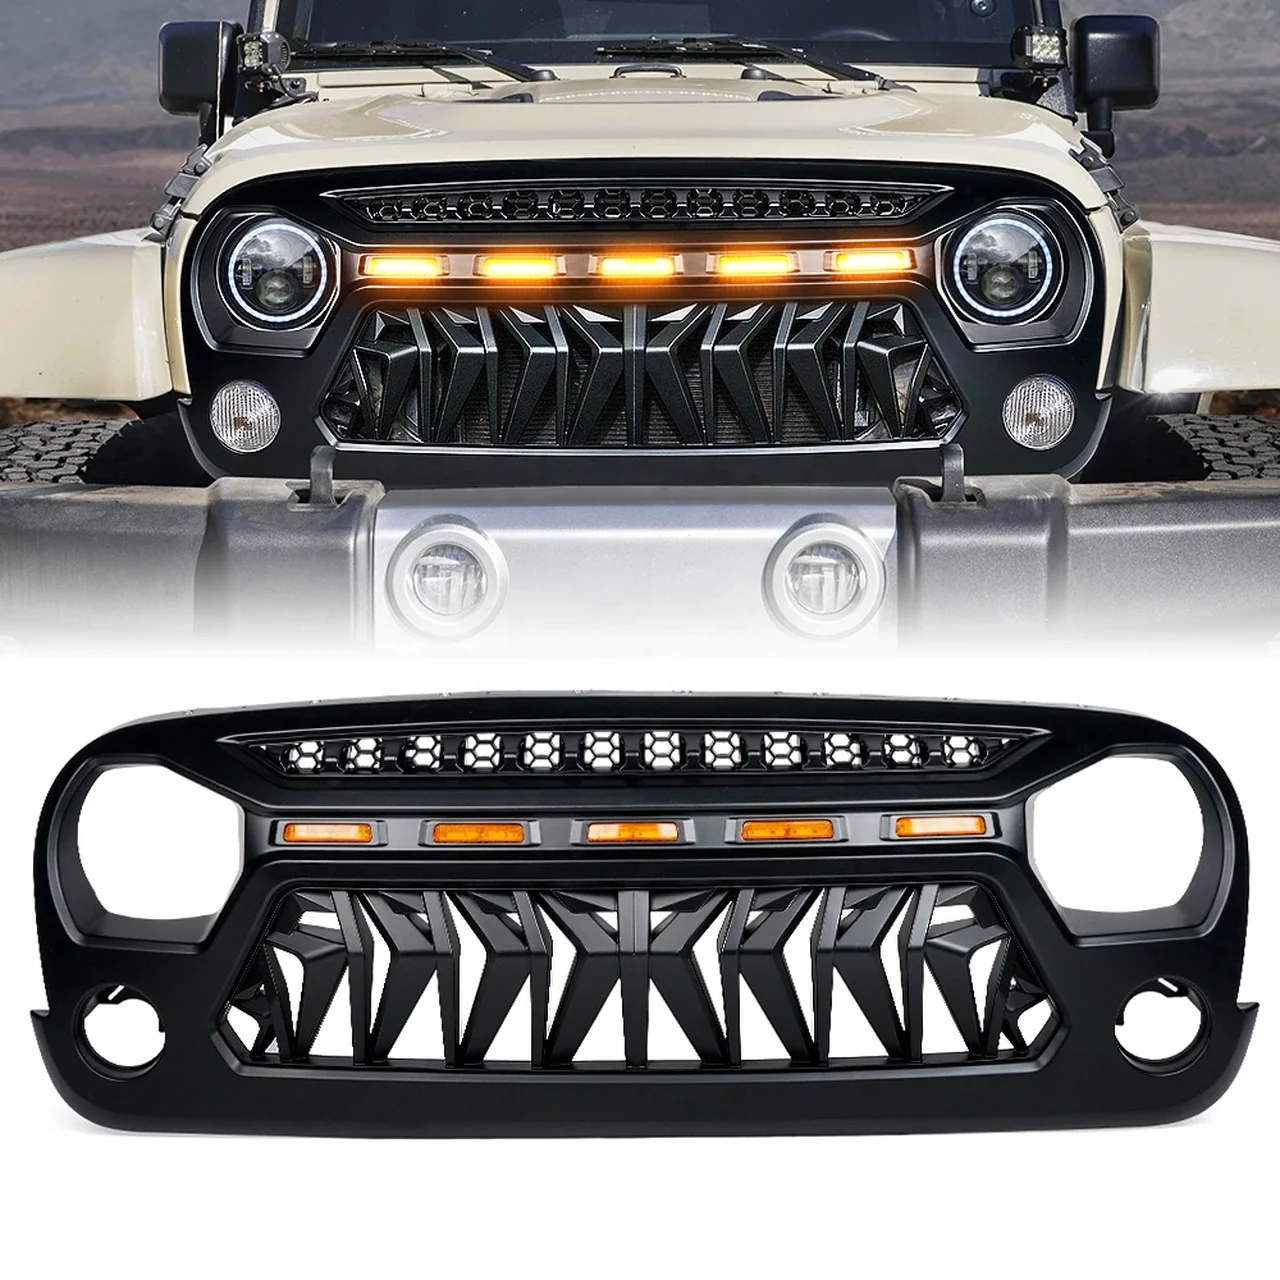 FRONT GRILLE For JEEP WRANGLER JK accessories 4x4 offroad grille with light factory